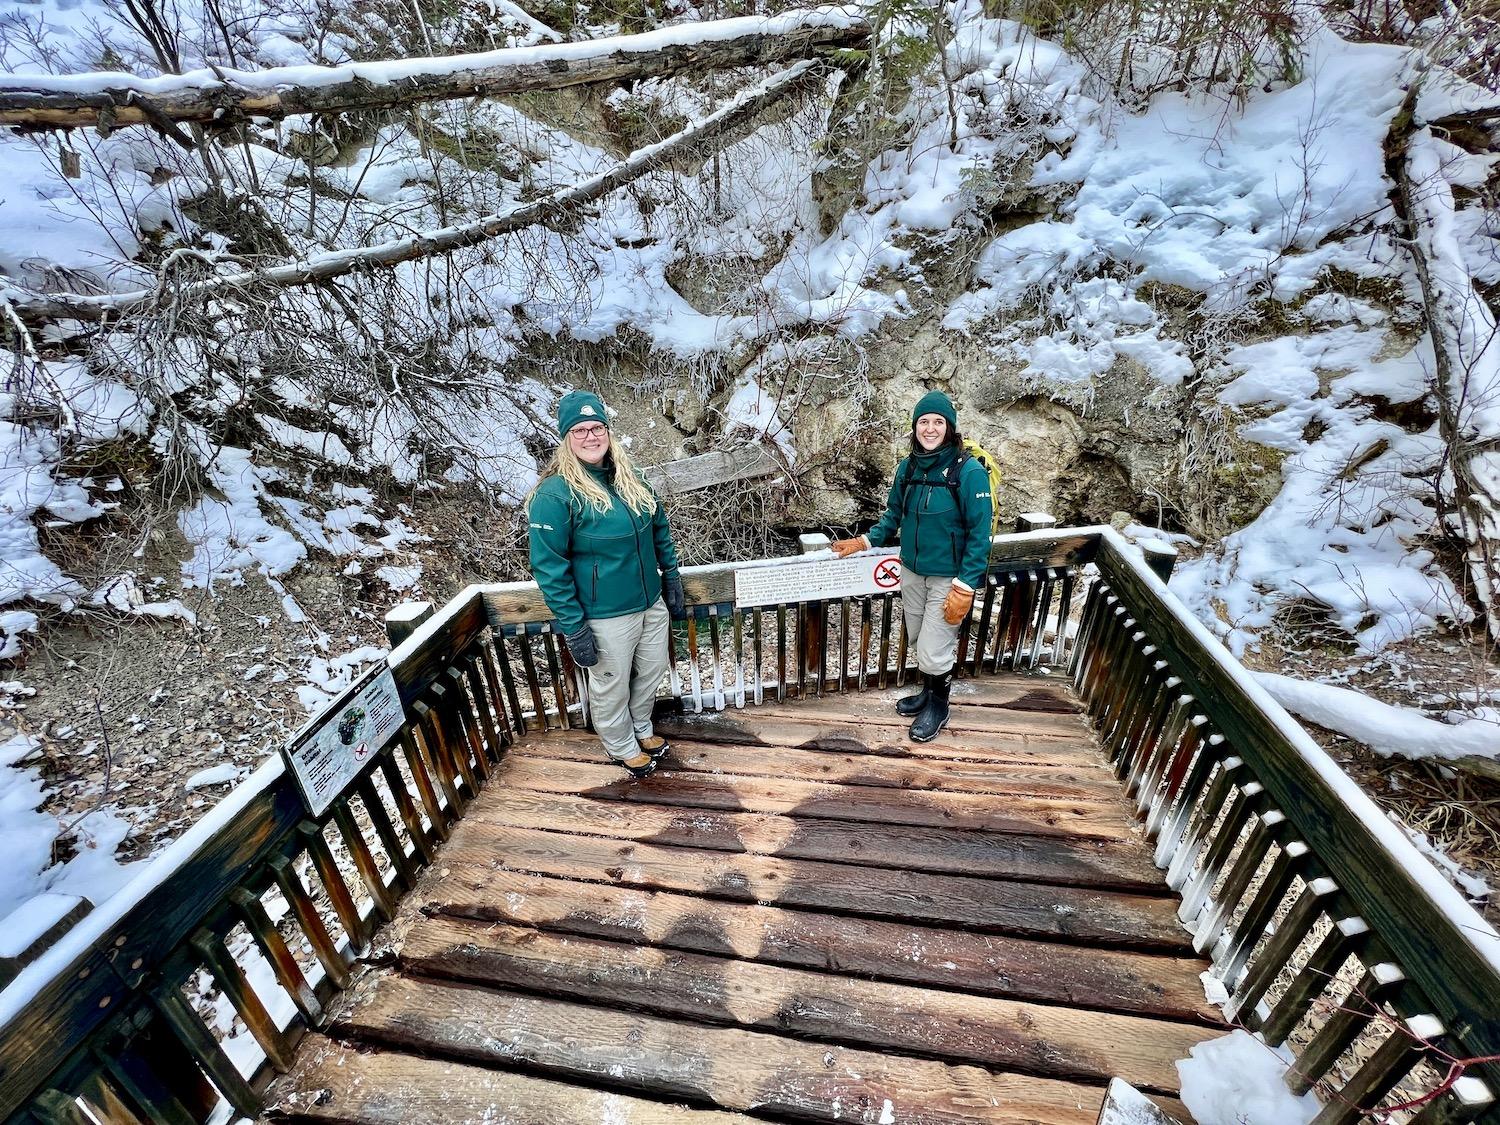 Endangered aquatic snails live in four thermal pools at Cave and Basin National Historic Site. Kira Tryon, a PR and communications officer for Banff National Park, and Kate Keenan, a resource conservation officer, stand by one of them.